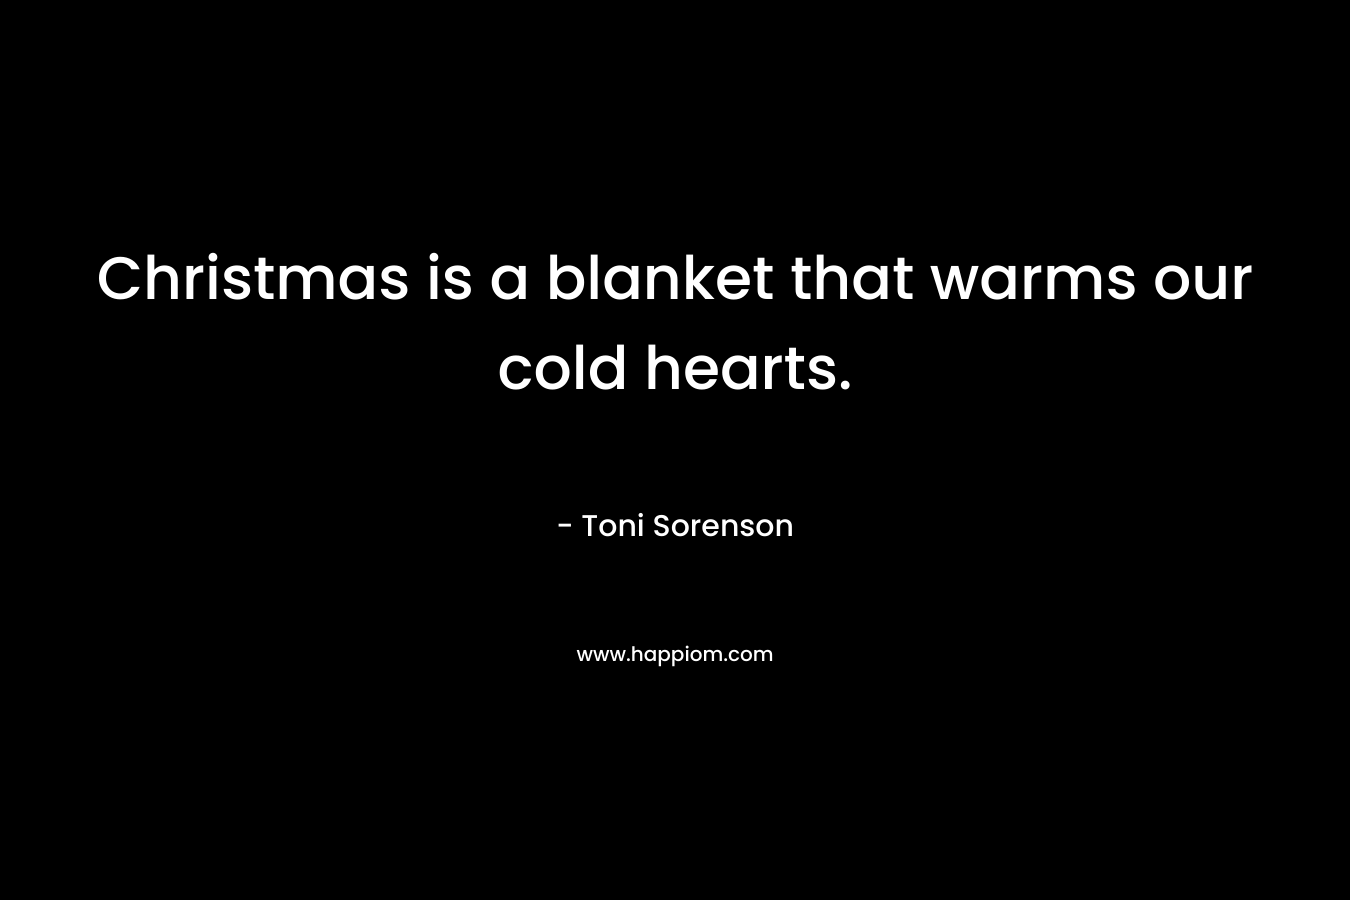 Christmas is a blanket that warms our cold hearts. – Toni Sorenson